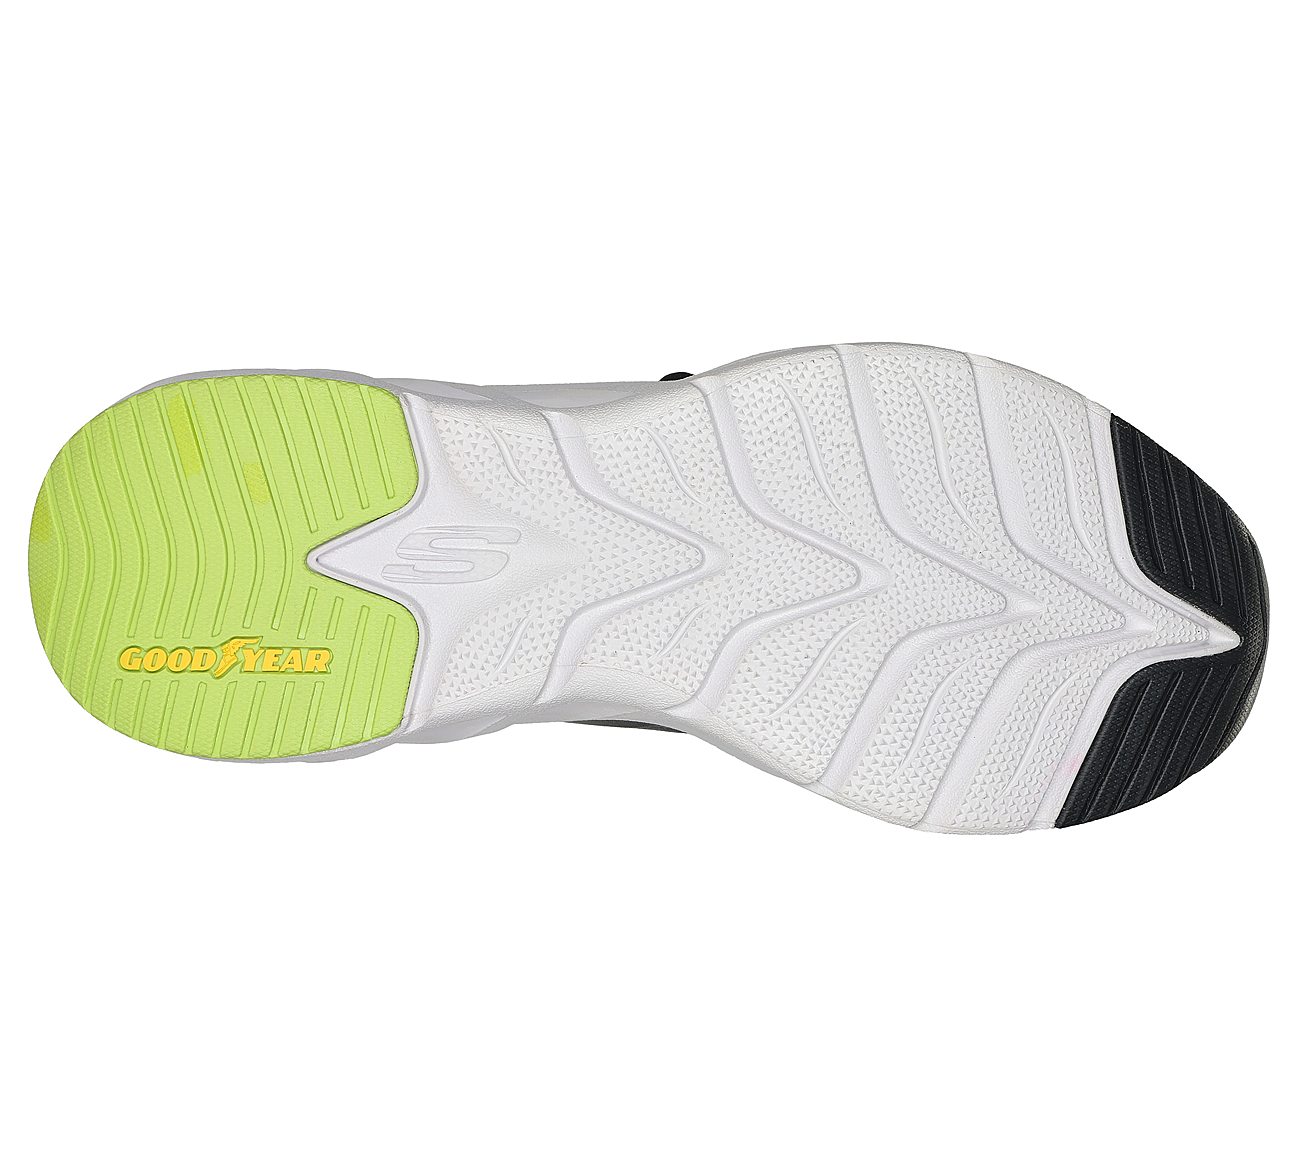 ARCH FIT GLIDE-STEP, CHARCOAL/LIME Footwear Bottom View